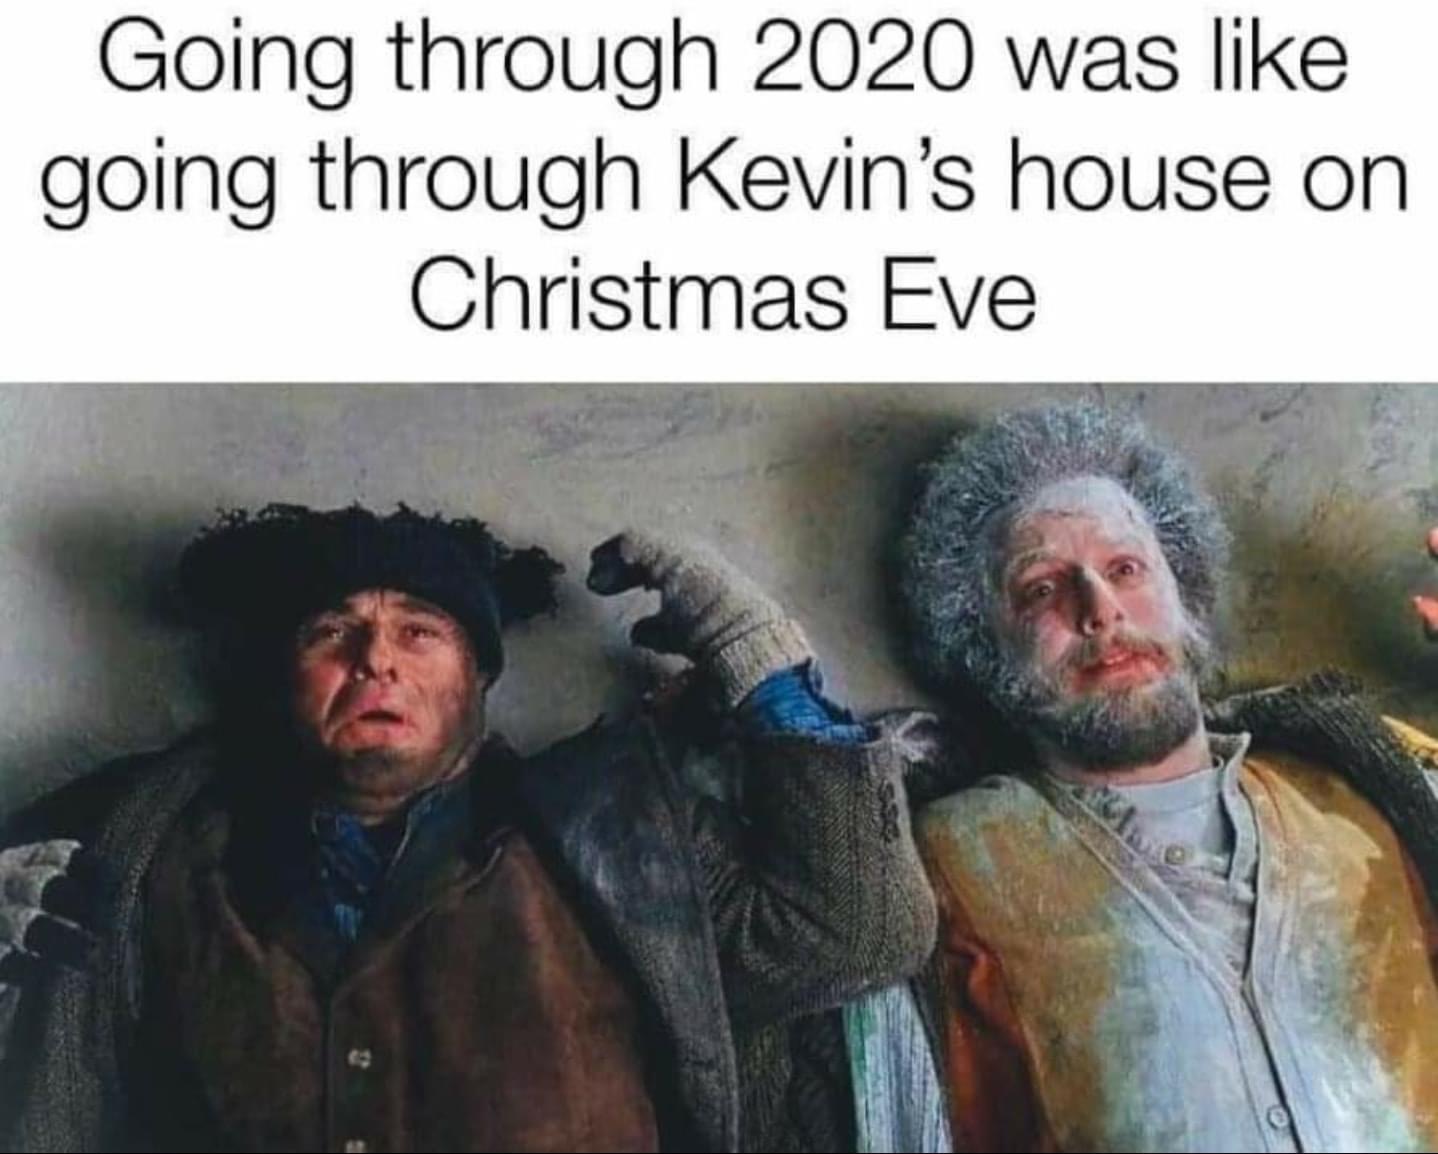 joe pesci home alone 2 - Going through 2020 was going through Kevin's house on Christmas Eve